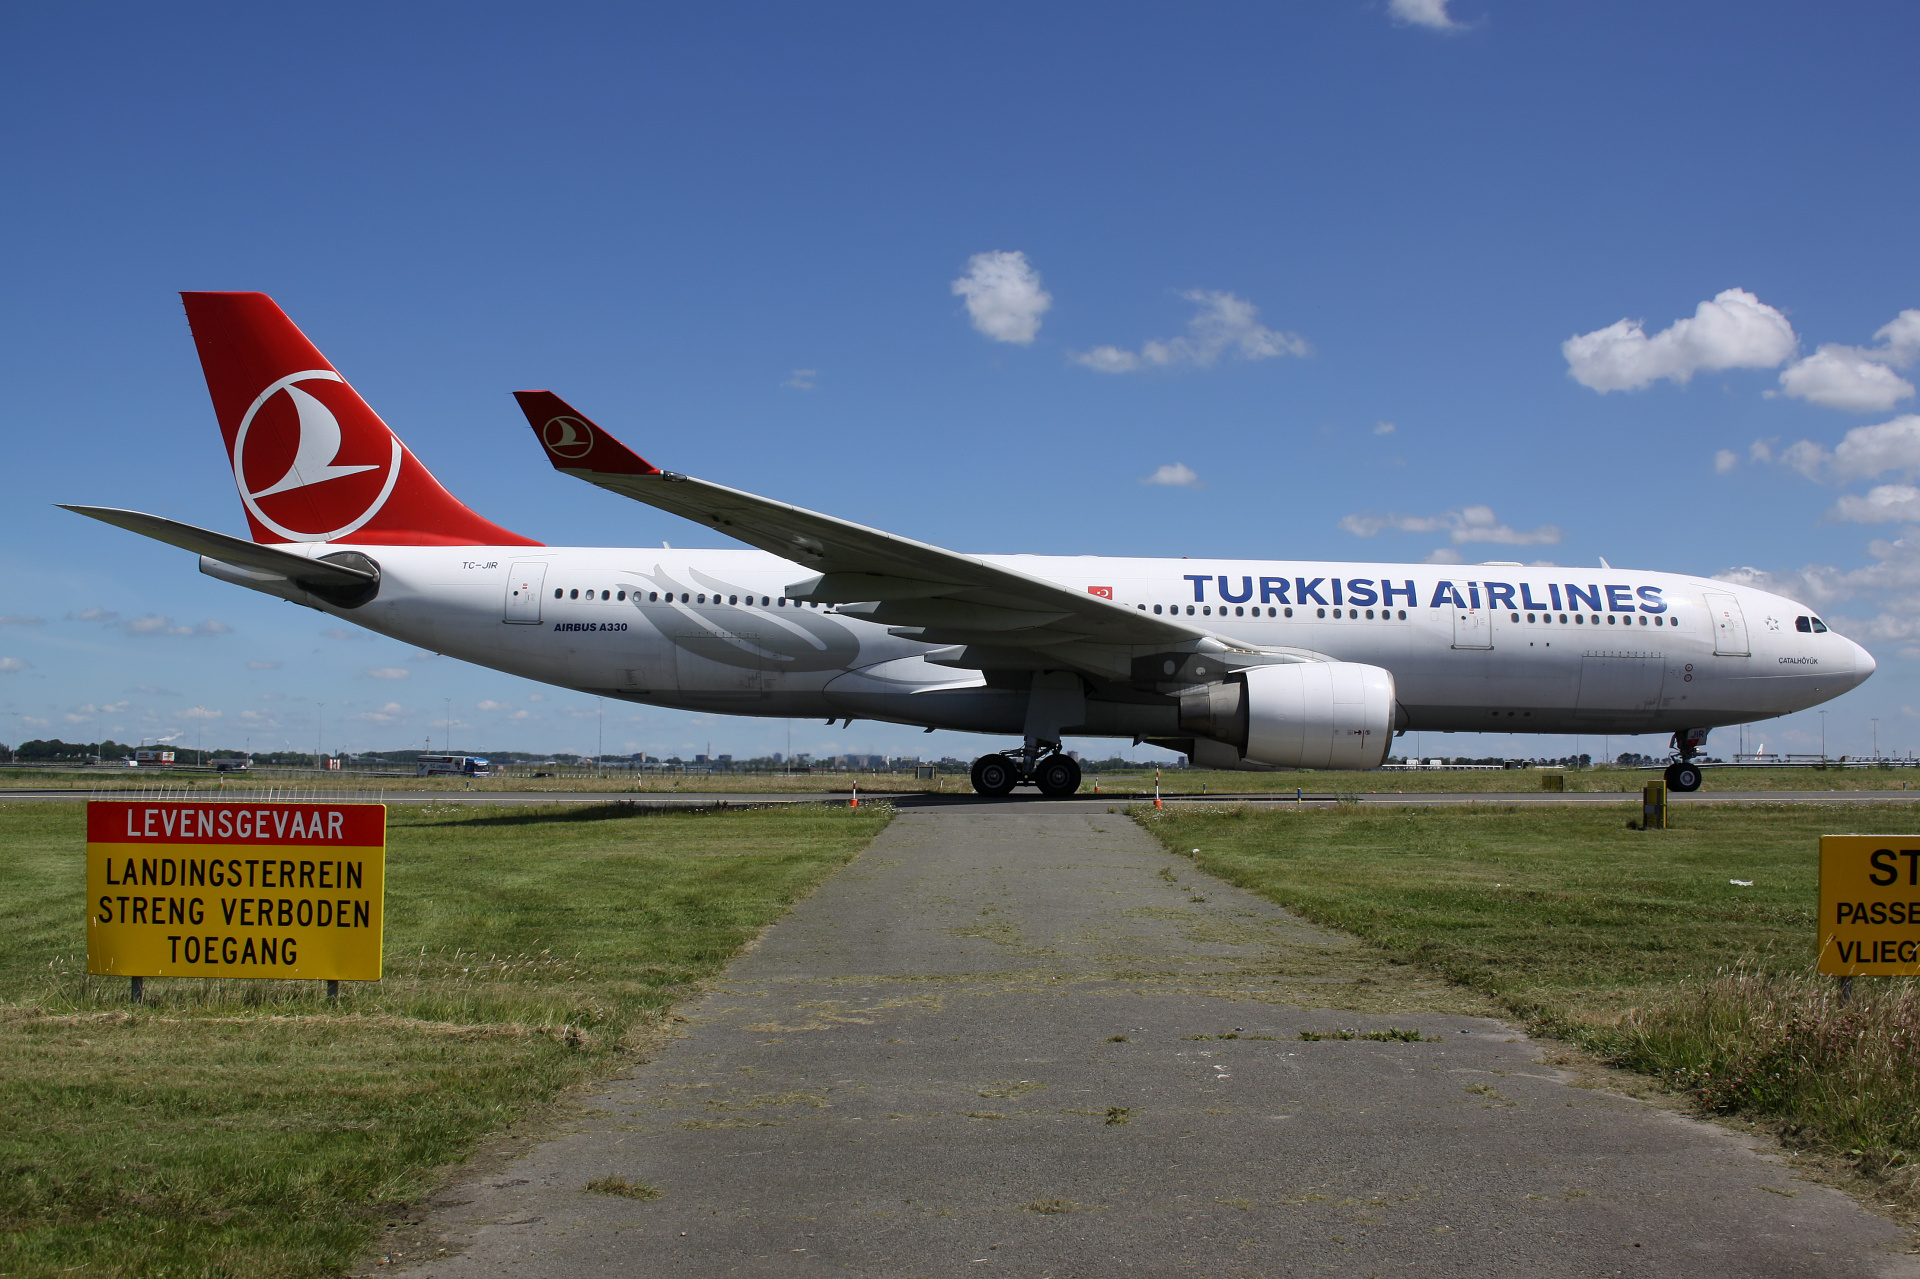 TC-JIR (Aircraft » Schiphol Spotting » Airbus A330-200 » THY Turkish Airlines)